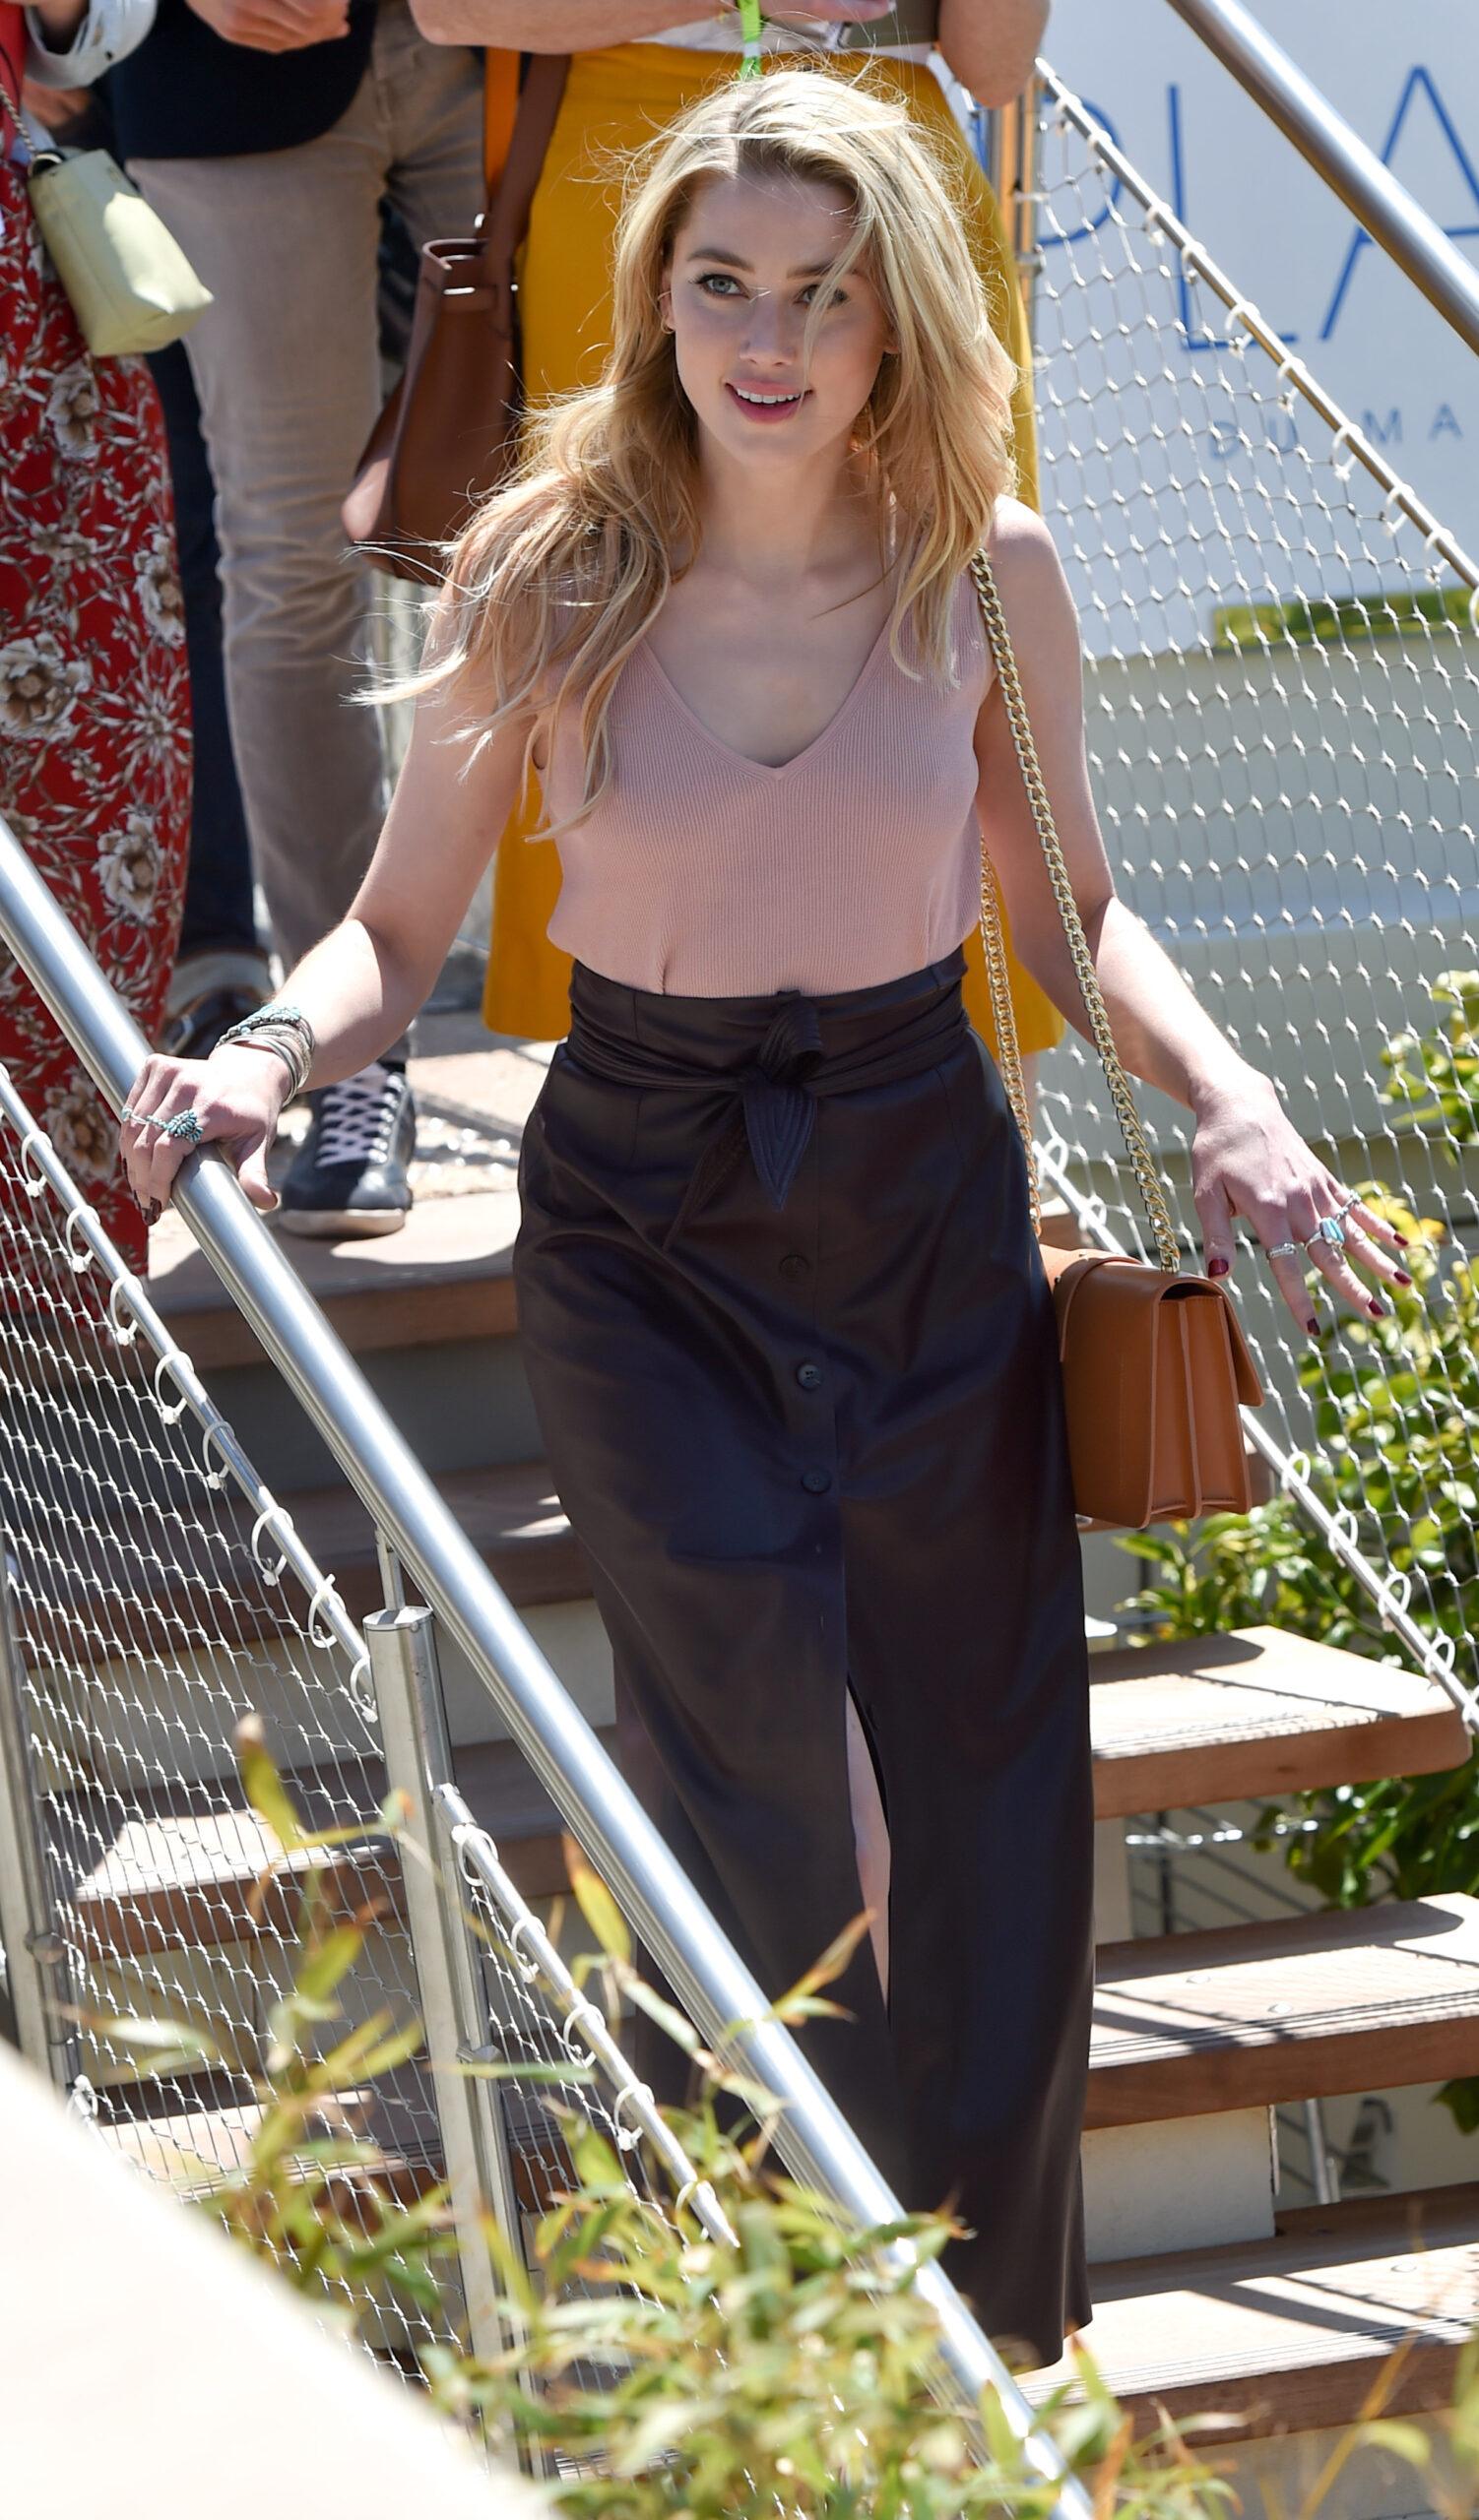 Amber Heard is seen at the Martinez beach club in Cannes